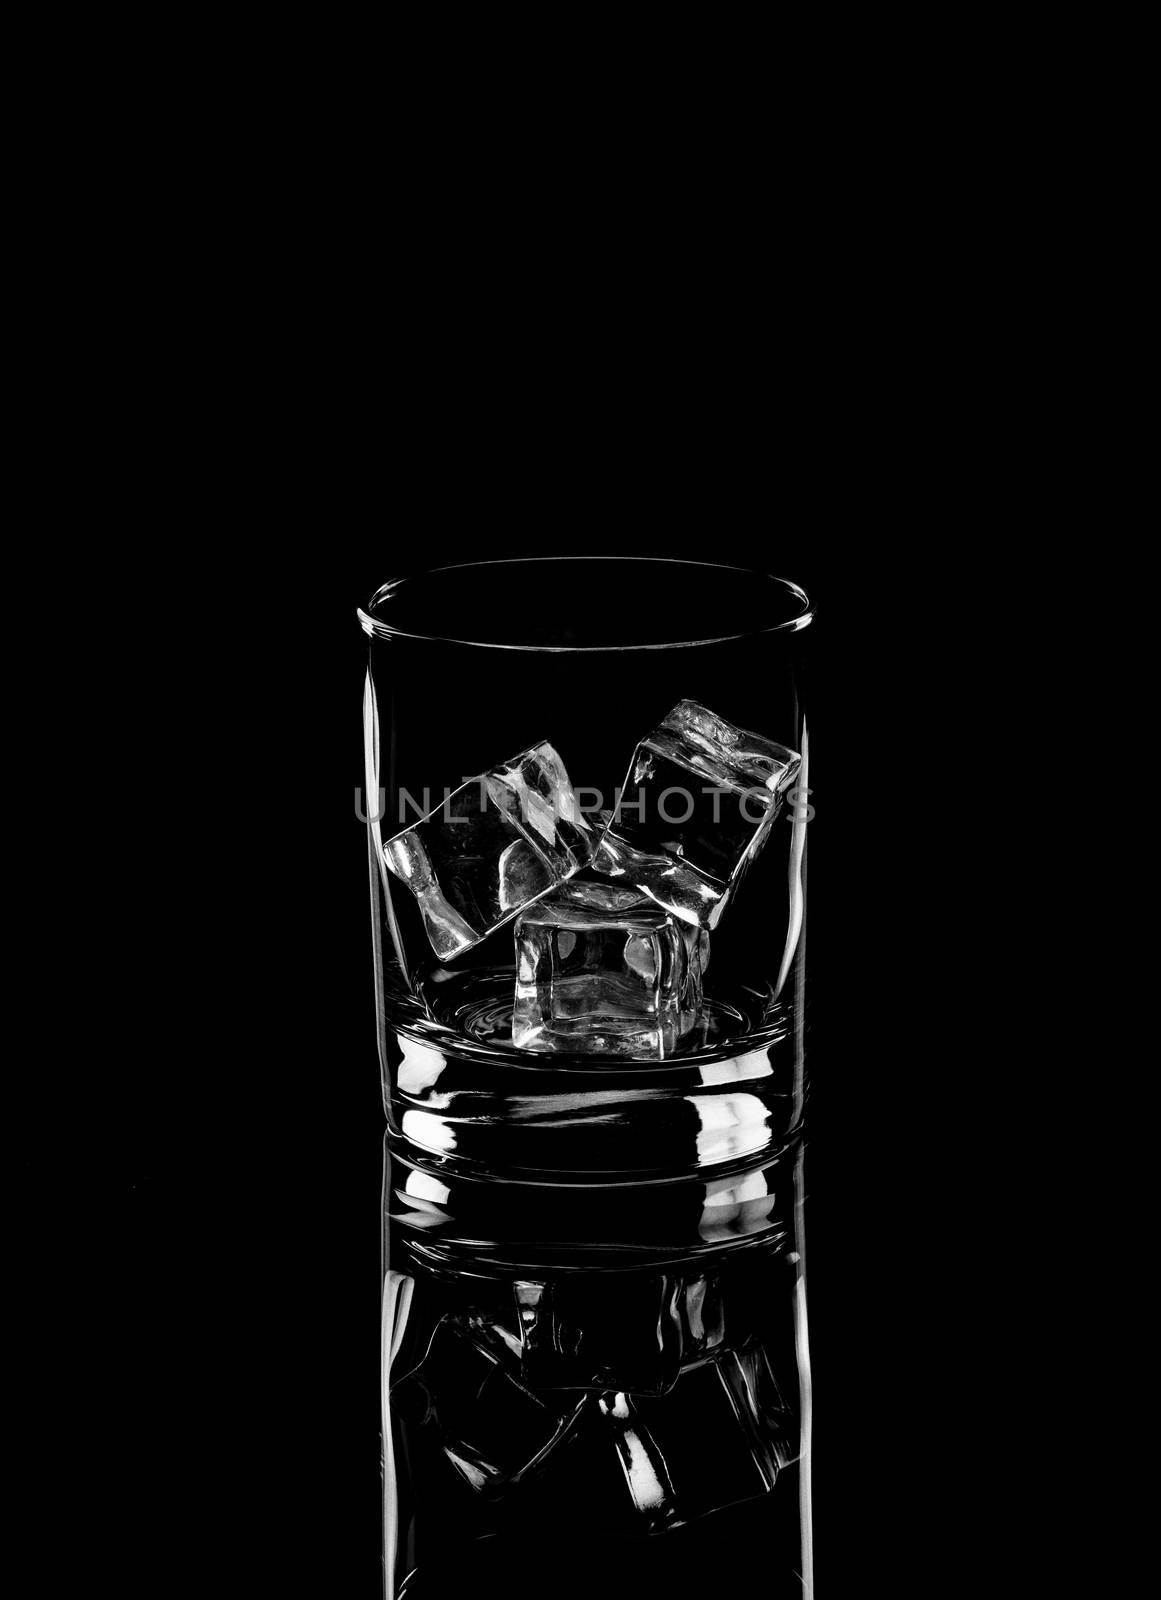 Vodka lime or gin tonic with ice in rocks glass on black background including clipping path